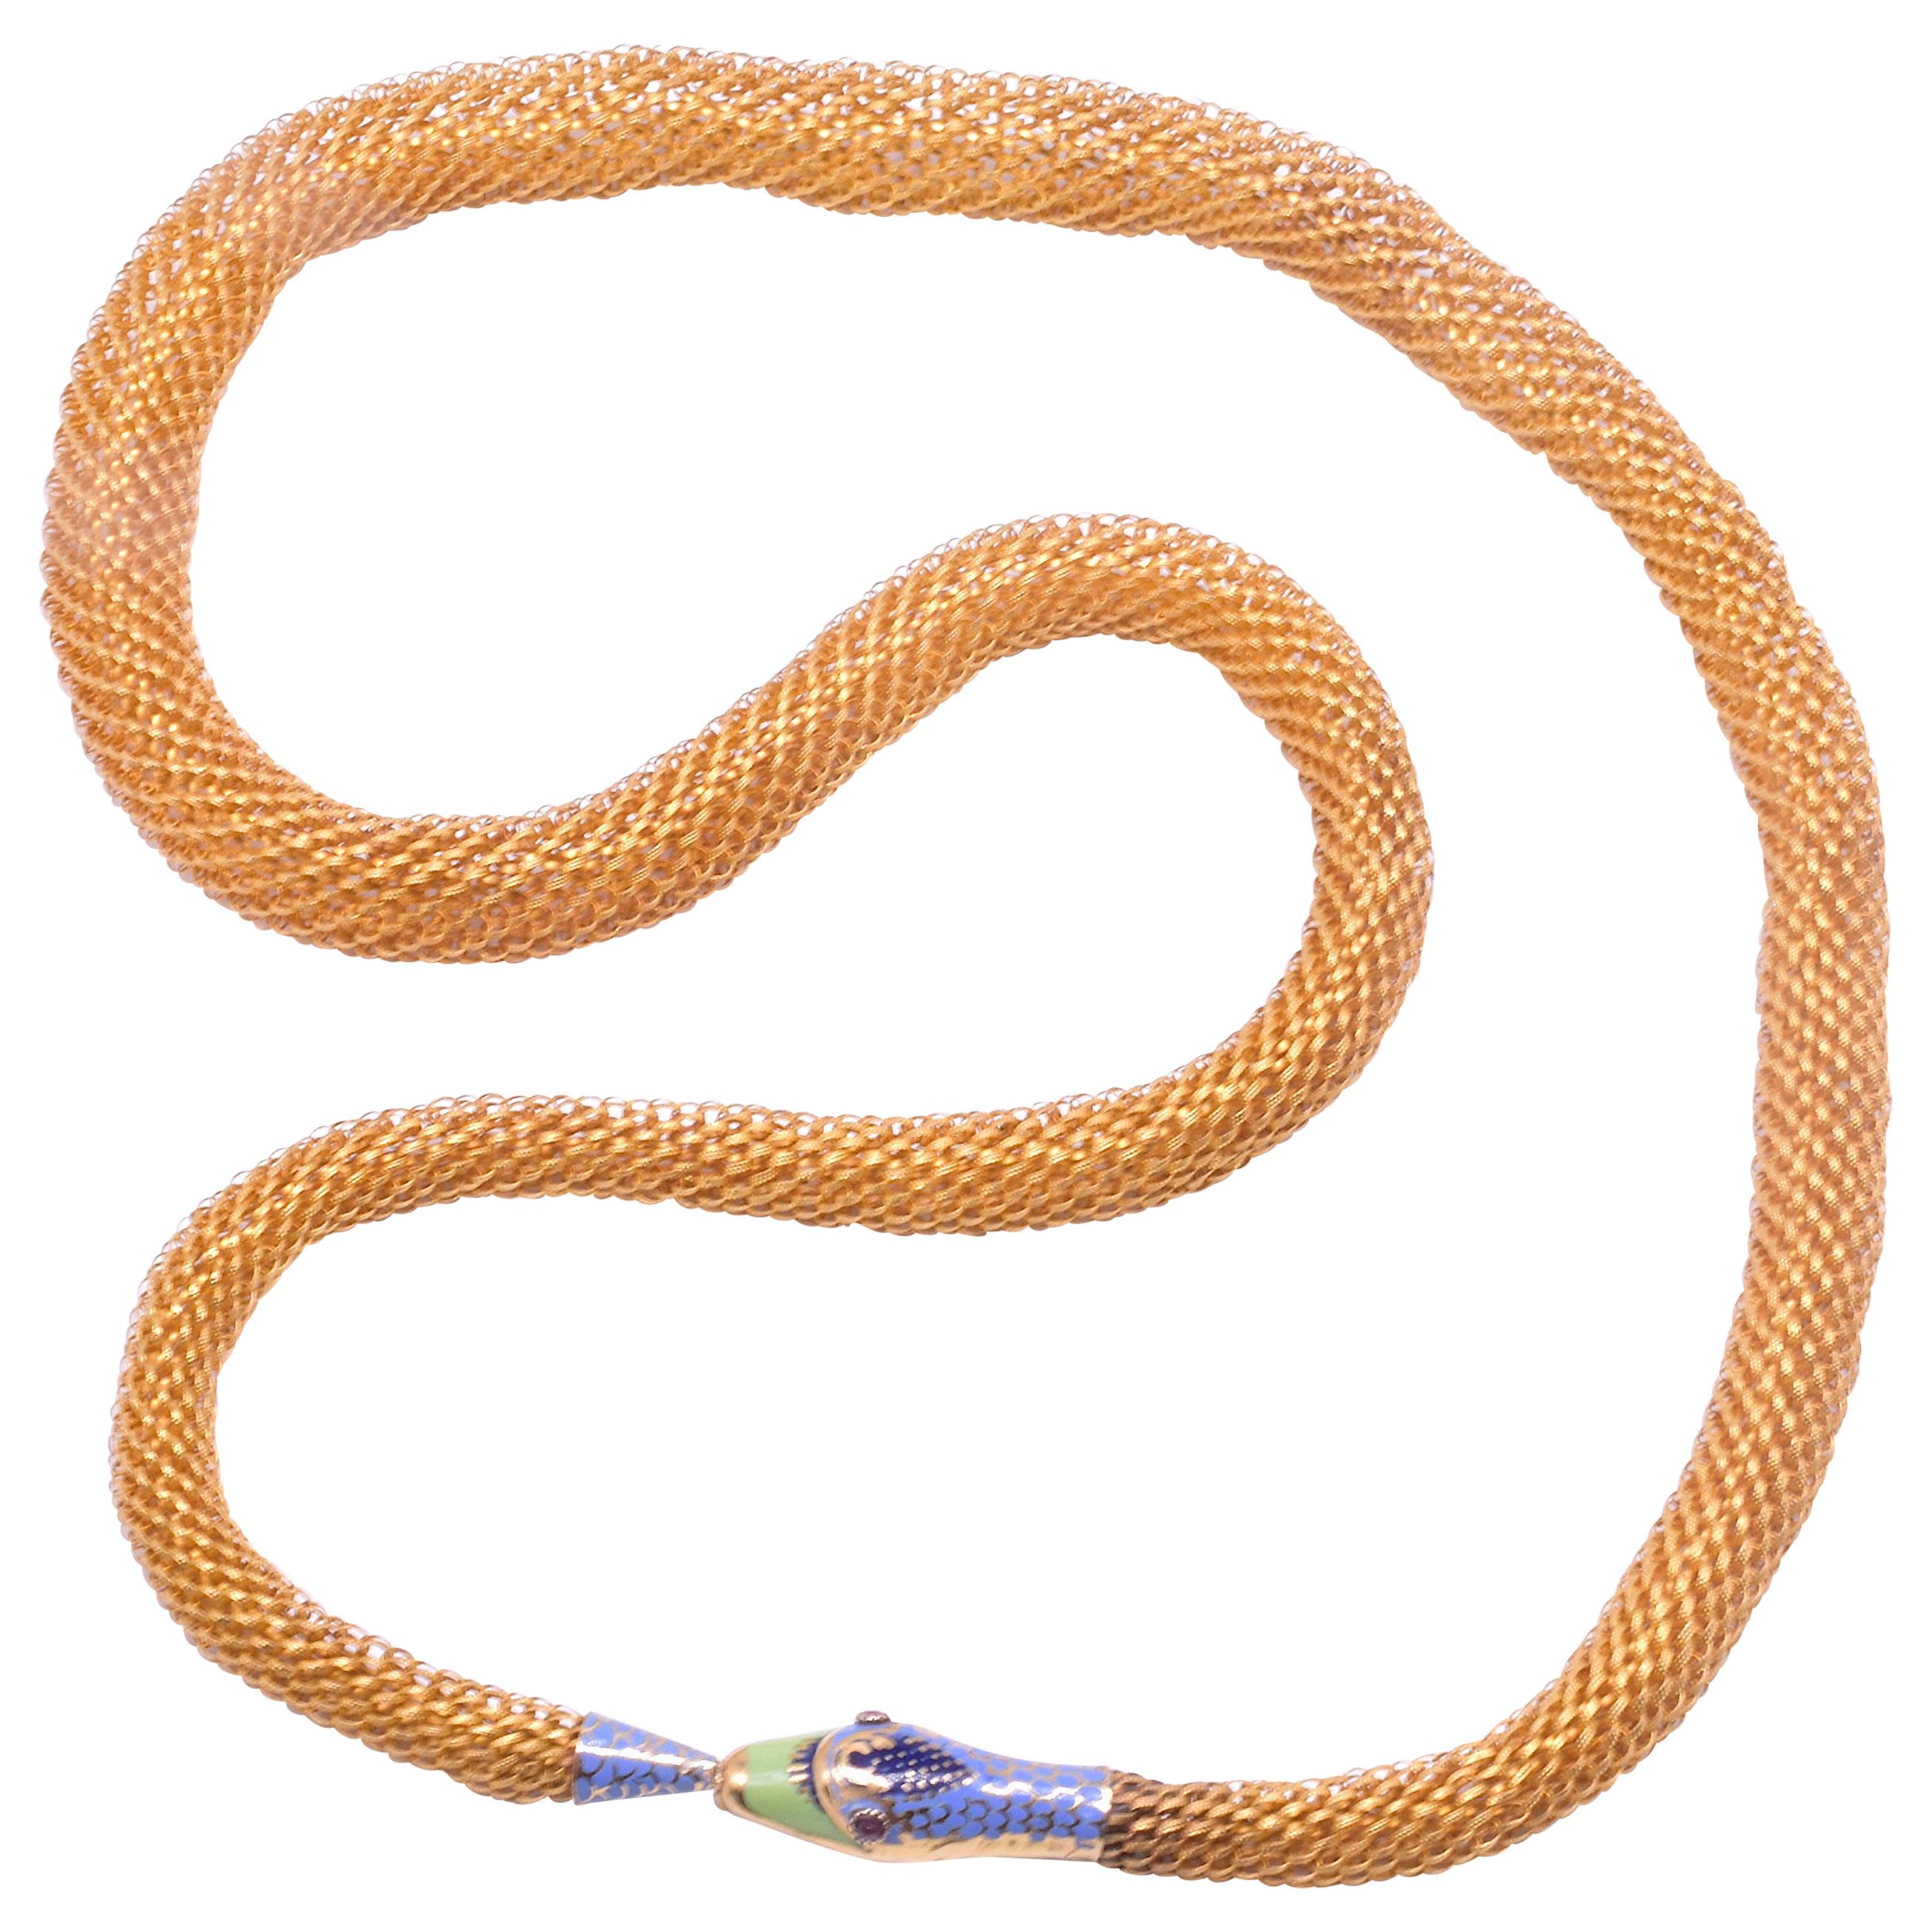 18K Snake Necklace with Enamelwork and Amethyst Paste Eyes, circa 1830